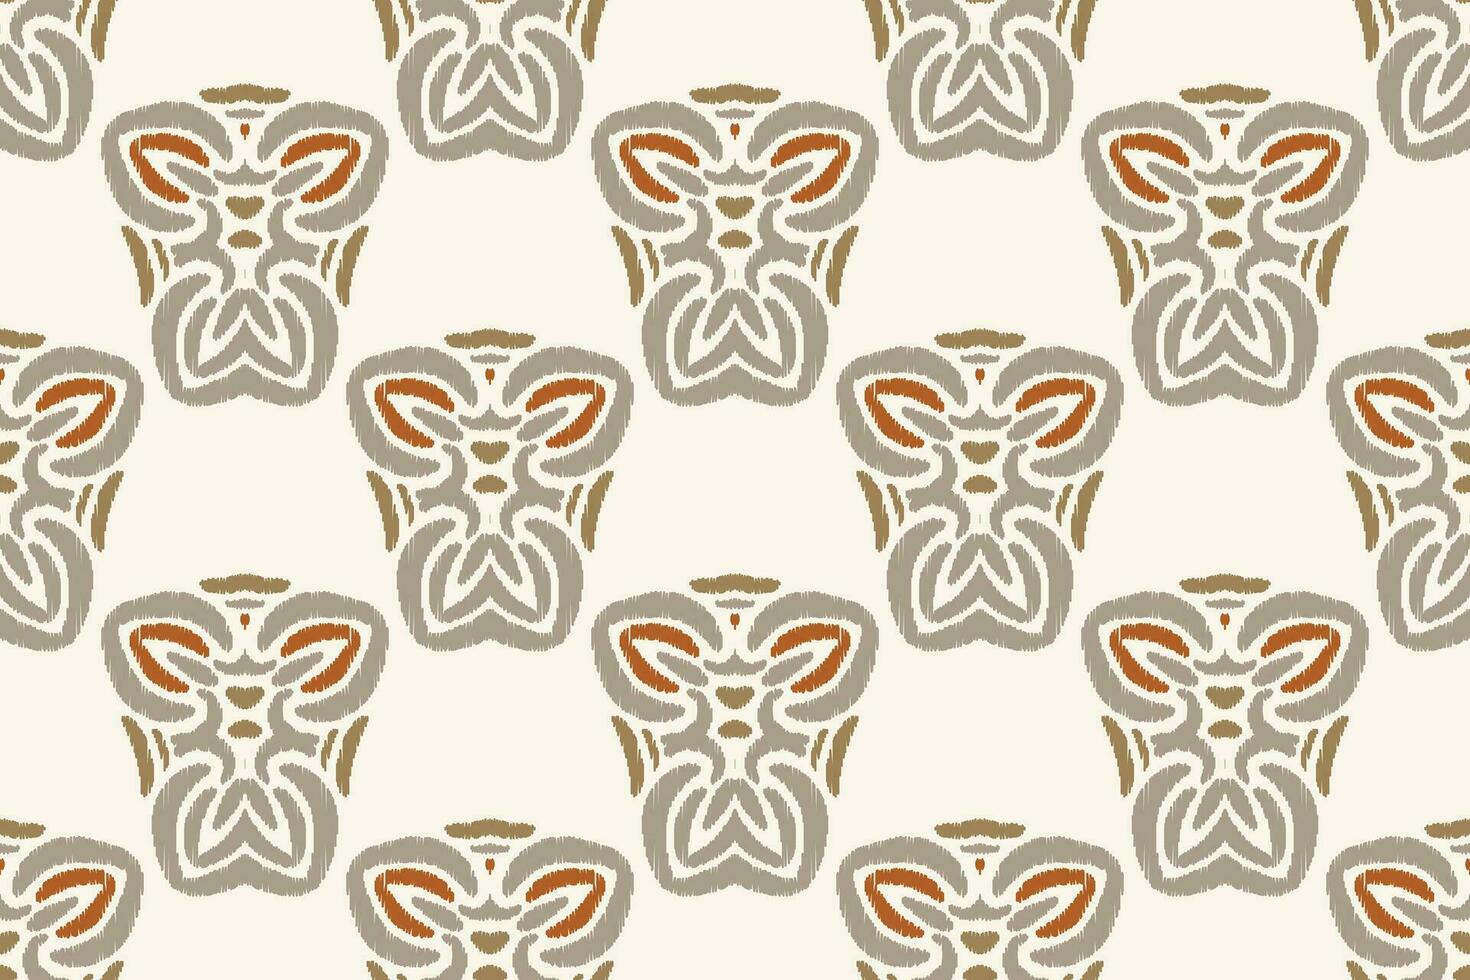 Motif Ikat Paisley Embroidery Background. Ikat Background Geometric Ethnic Oriental Pattern traditional.aztec Style Abstract Vector illustration.design for Texture,fabric,clothing,wrapping,sarong.